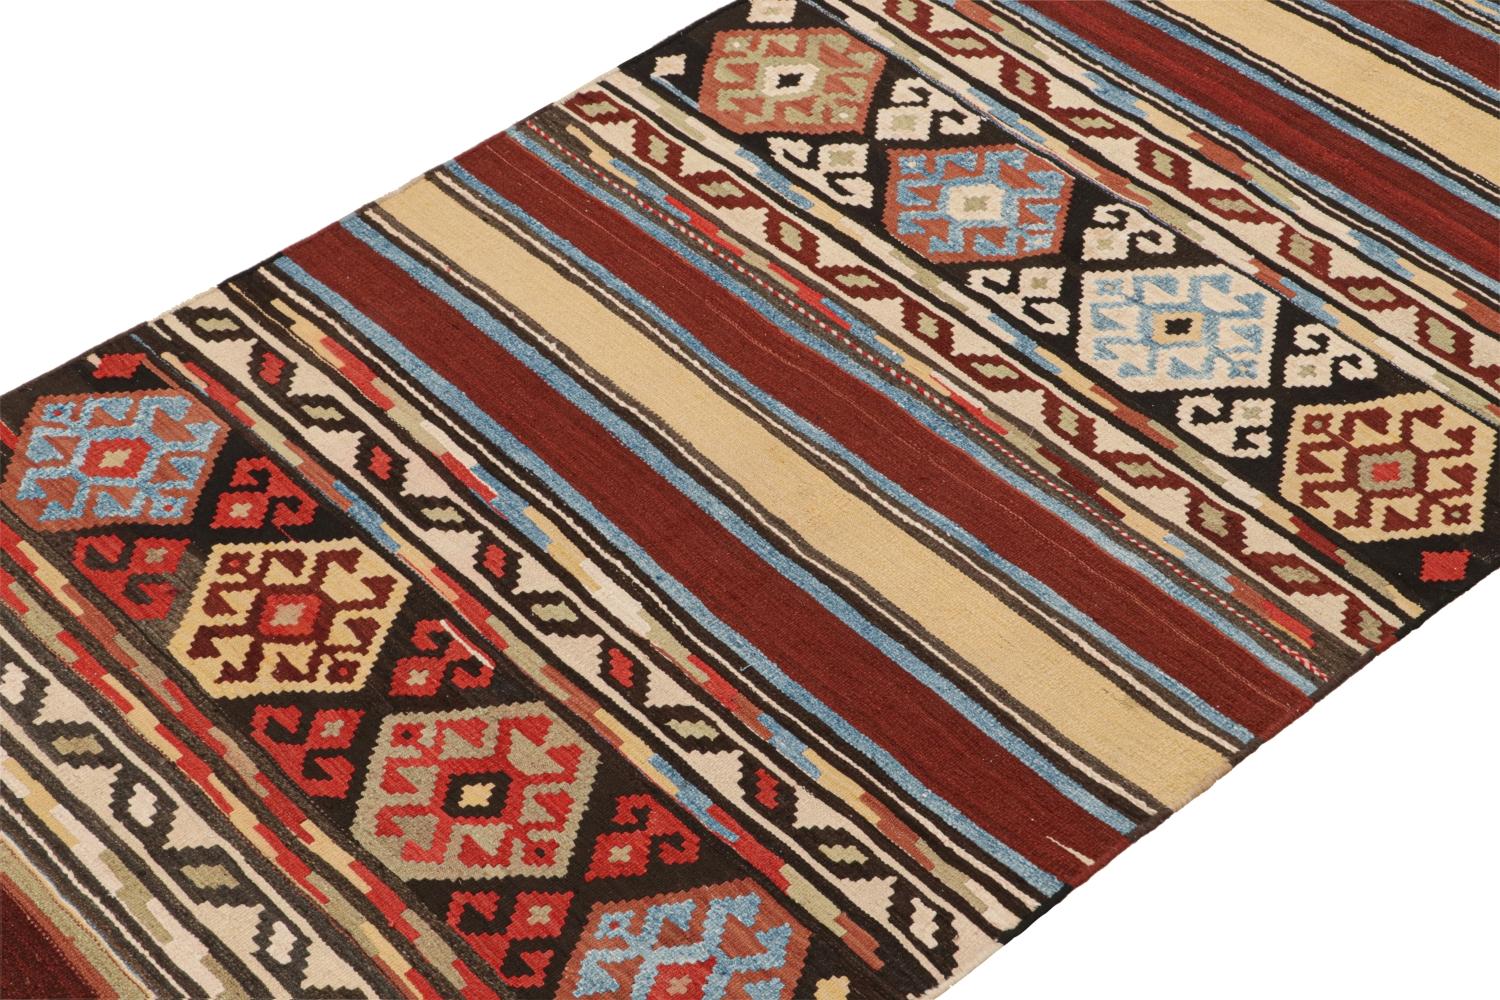 This vintage 4x12 Persian Kilim is a mid-century tribal rug believed to originate from the Shahsavan tribe. 

On the Design:

Handwoven in wool circa 1950-1960, its design enjoys a play of stripes and geometric patterns in rich red, beige-brown